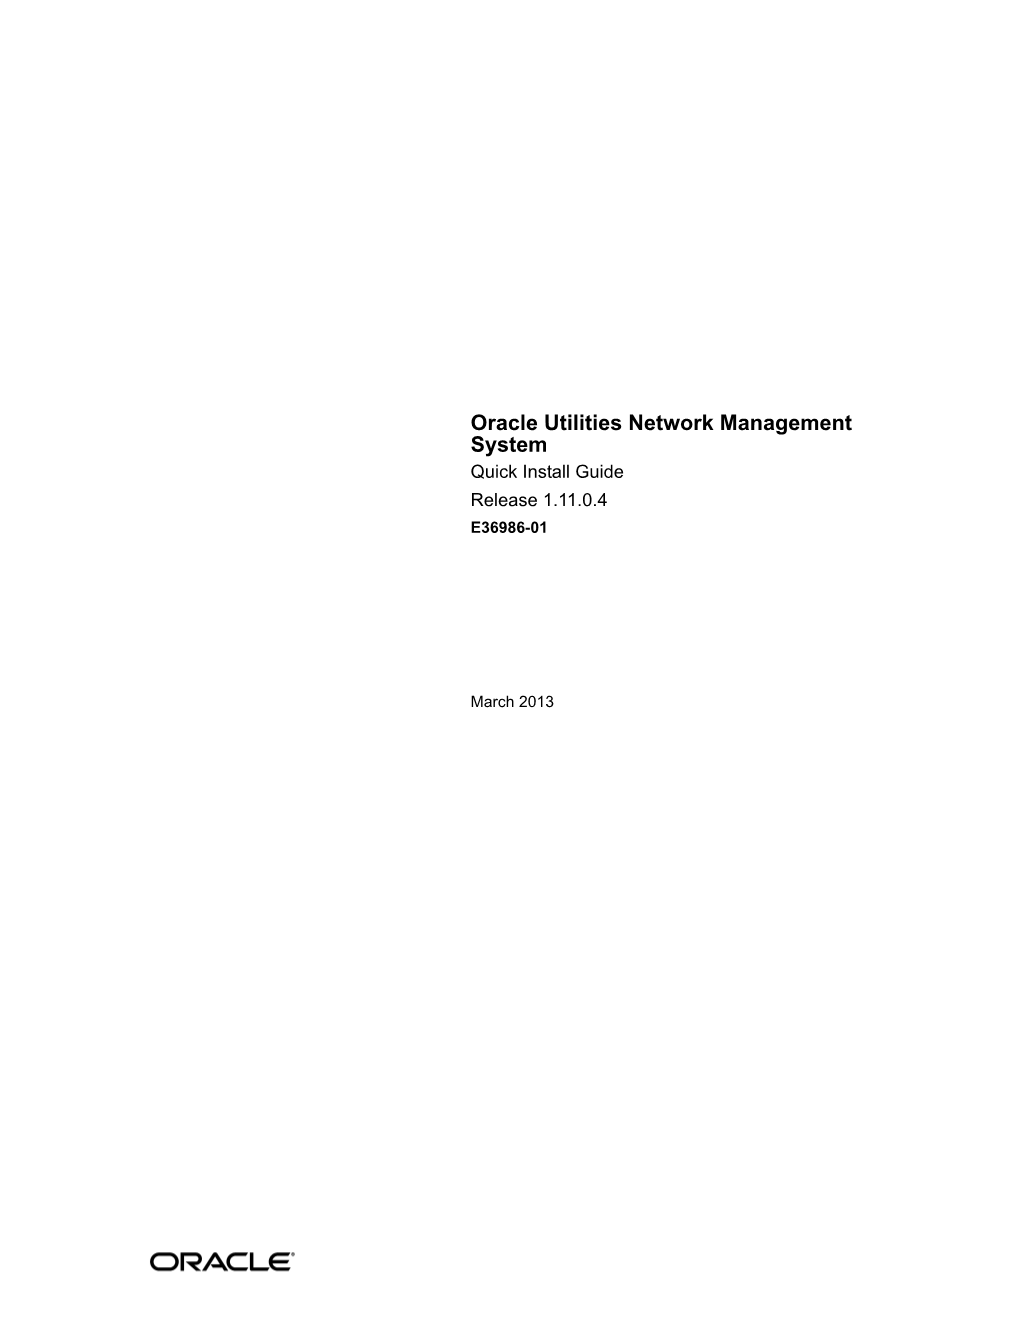 Oracle Utilities Network Management System Quick Install Guide Release 1.11.0.4 E36986-01